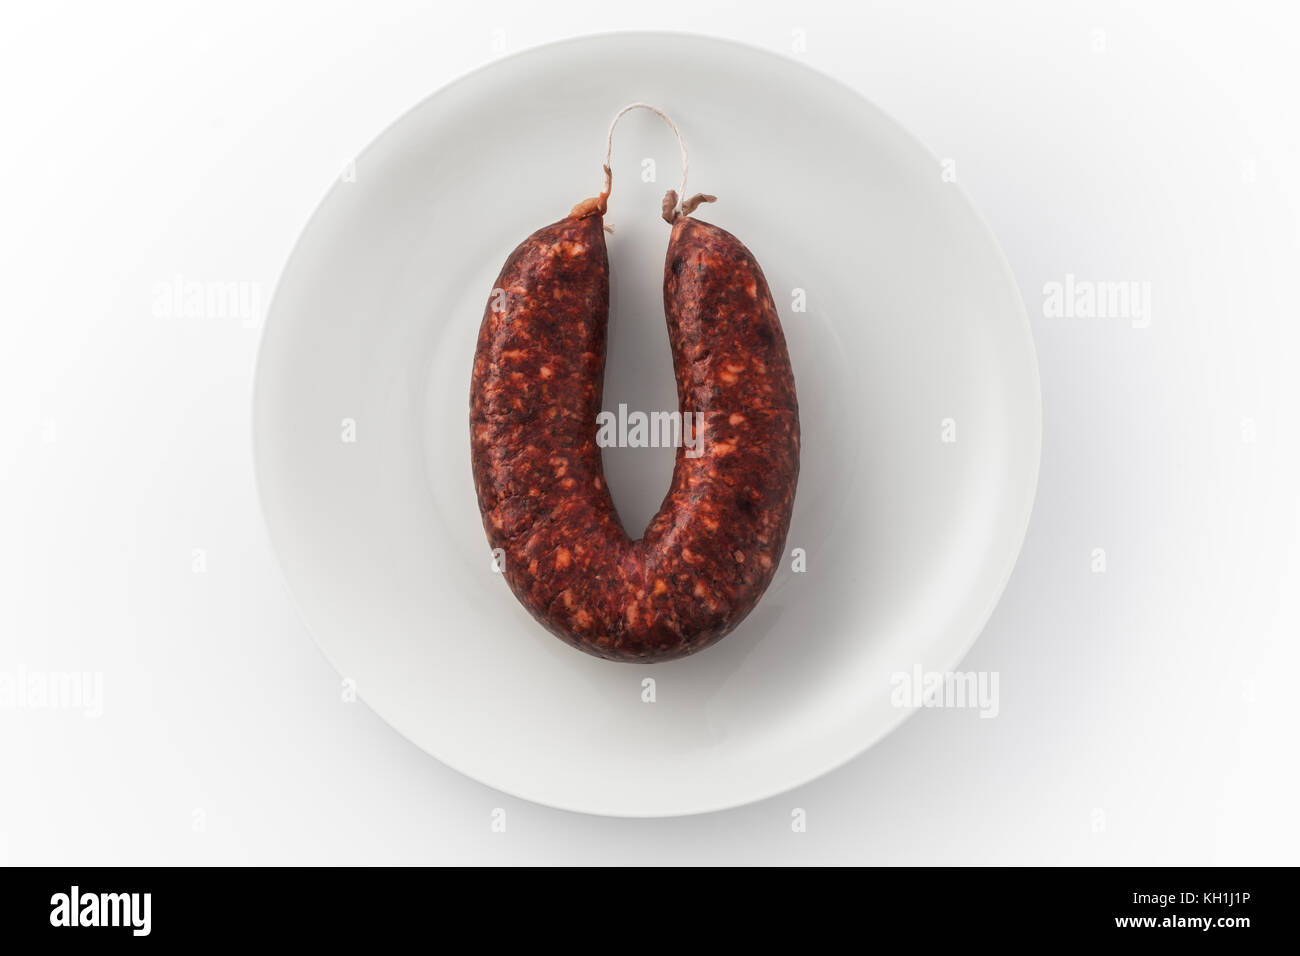 View of sausage on a white plate Stock Photo